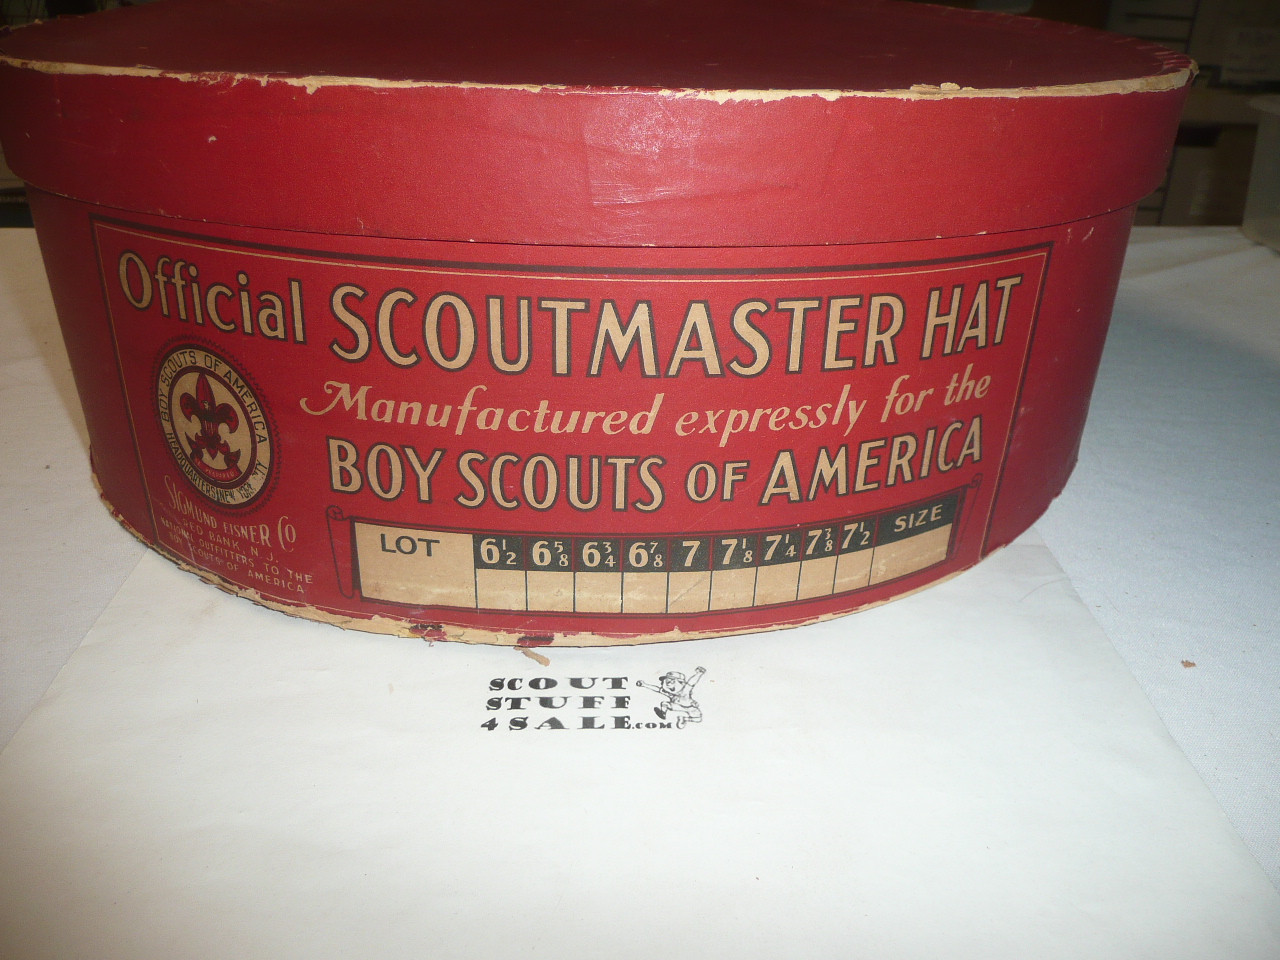 Official Boy Scout Campaign Hat by Sigmund Eisner (Smokey the Bear hat), size 7, Like new in the Original Hat Box, box shows some wear